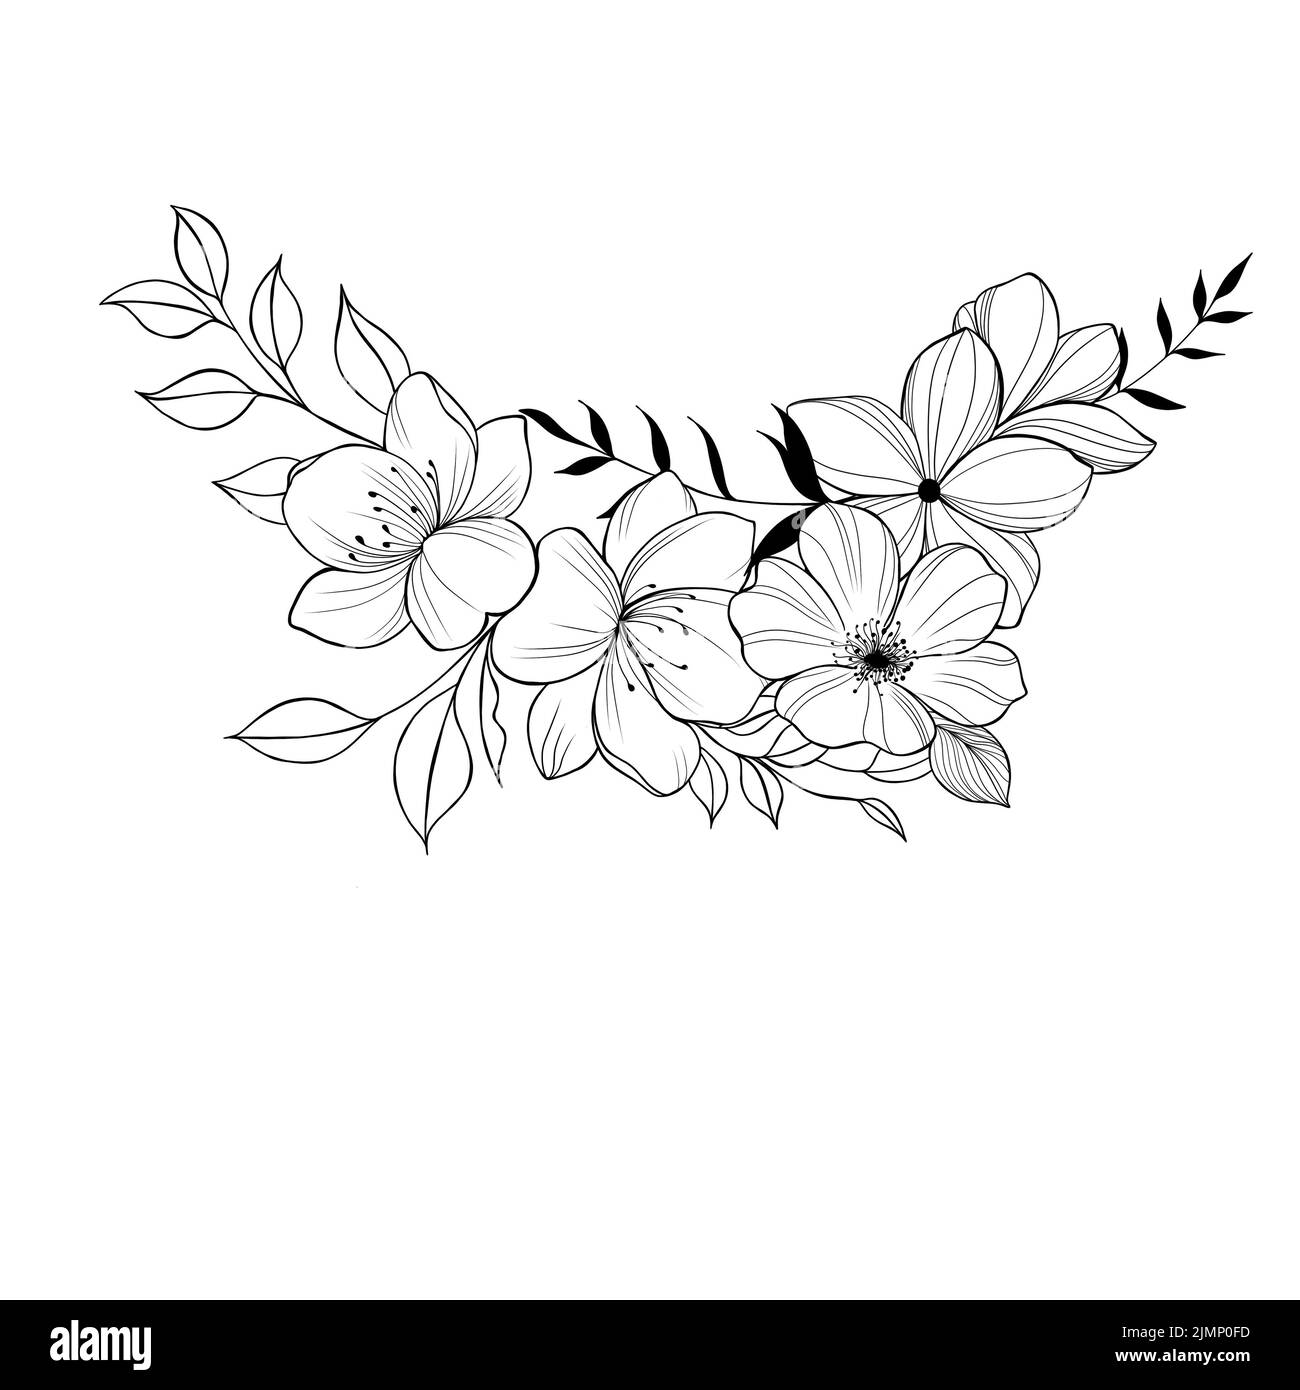 Flowers Periwinkle. Hand drawing. Outline. On a white background. Beautiful sketch of a tattoo - a delicate twig with flowers. botany design element Stock Photo